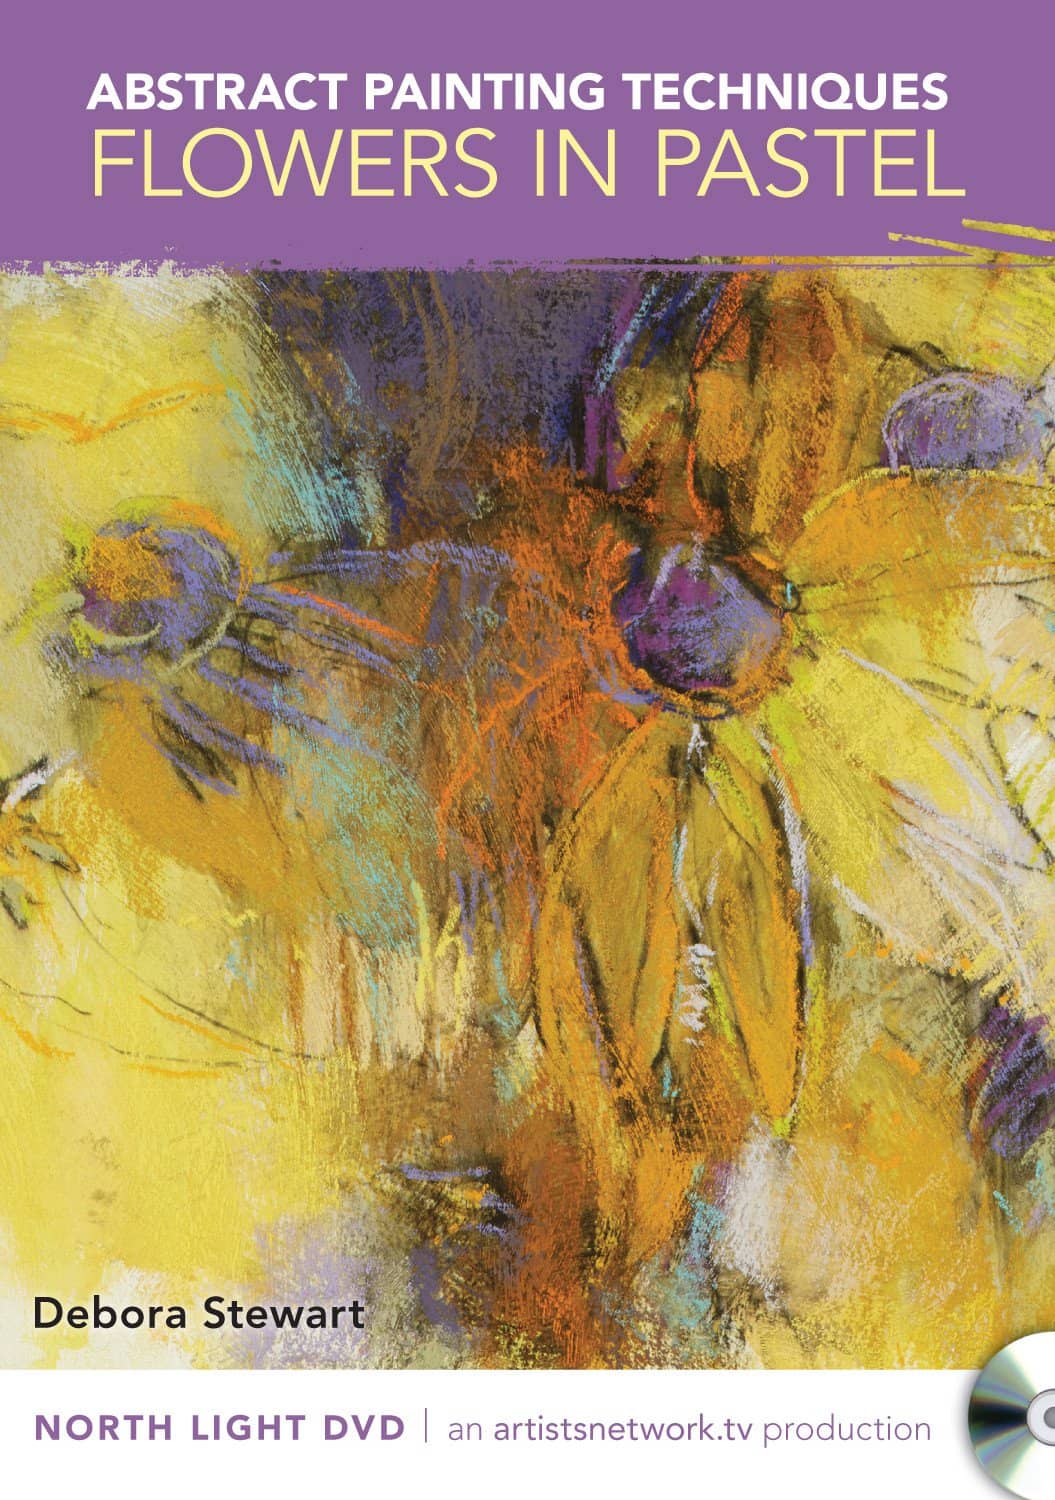 Debora Stewart: Abstract Painting Techniques - Flowers in Pastel -  